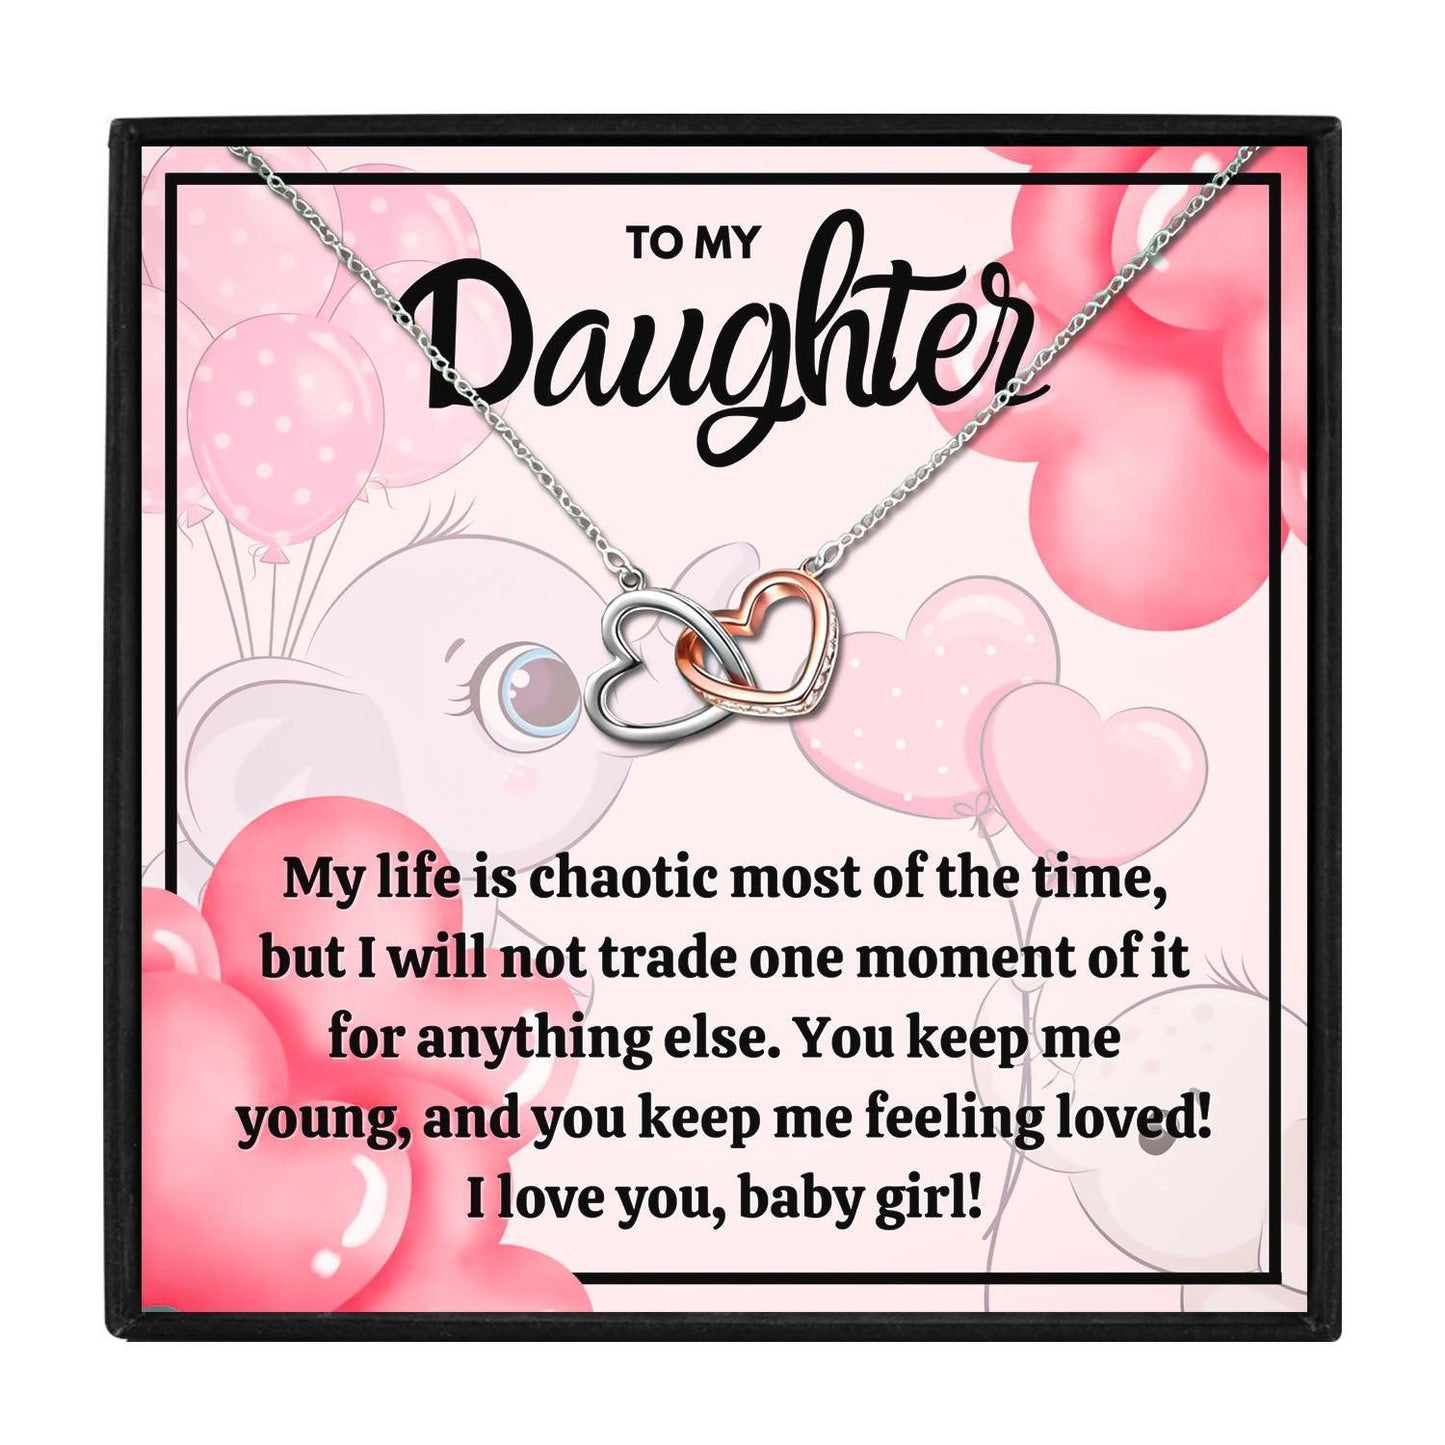 To My Daughter Necklace From Love Mom And Dad for Christmas 2023 | To My Daughter Necklace From Love Mom And Dad - undefined | daughter gift, daughter gift ideas, Daughter Necklace, Mother Daughter, Mother Daughter Gift Necklace, Mother Daughter Infinity Necklace, Mother Daughter Necklace, Mother Daughter Wedding Gift | From Hunny Life | hunnylife.com